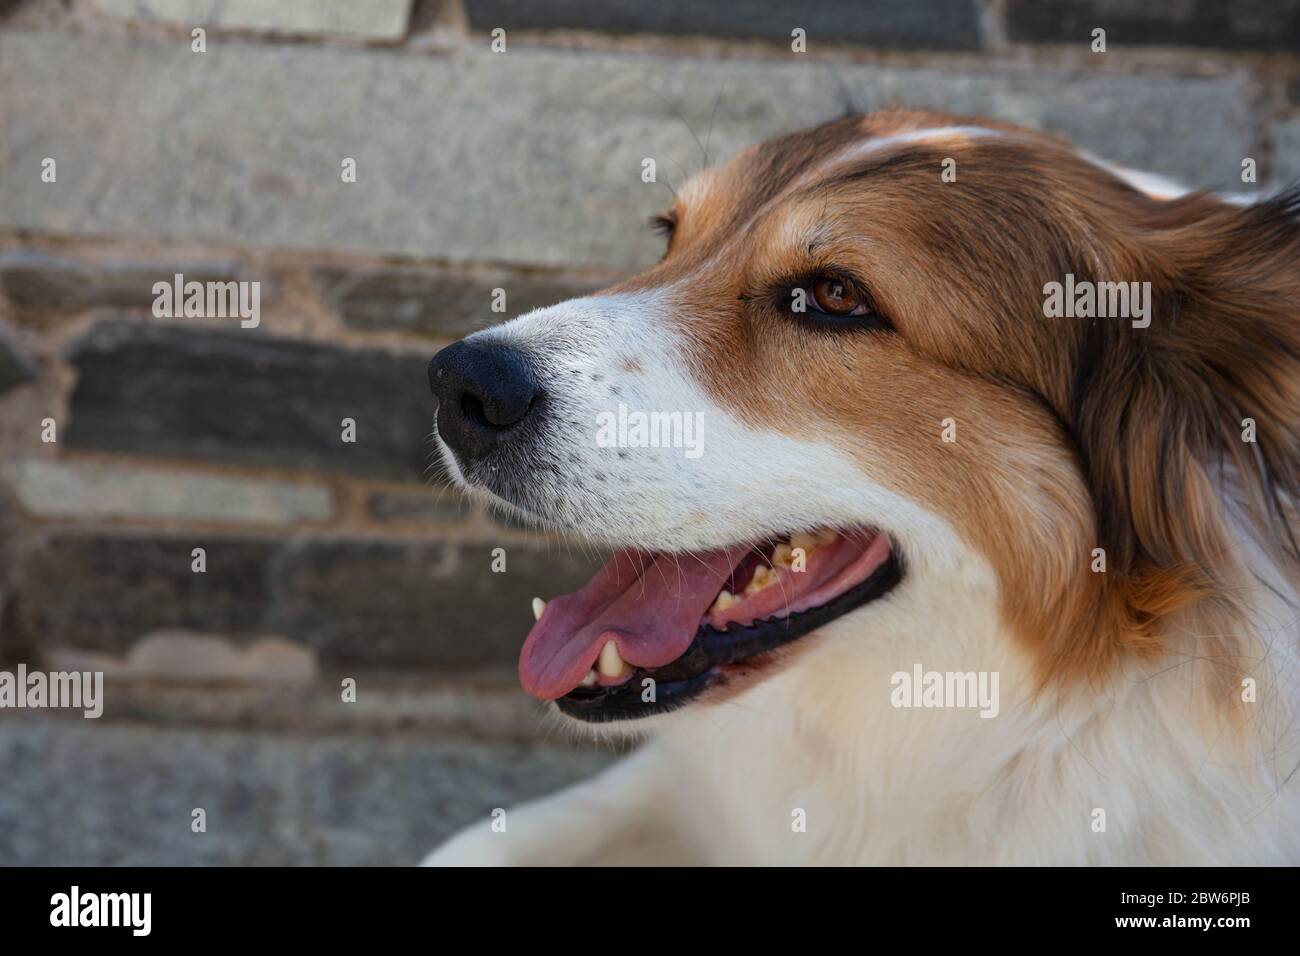 Cute Female Greek Shepherd Dog Looking At The Left Side White And Brown Color Pet Animal Head Closeup View Blur Stonewall Background Stock Photo Alamy